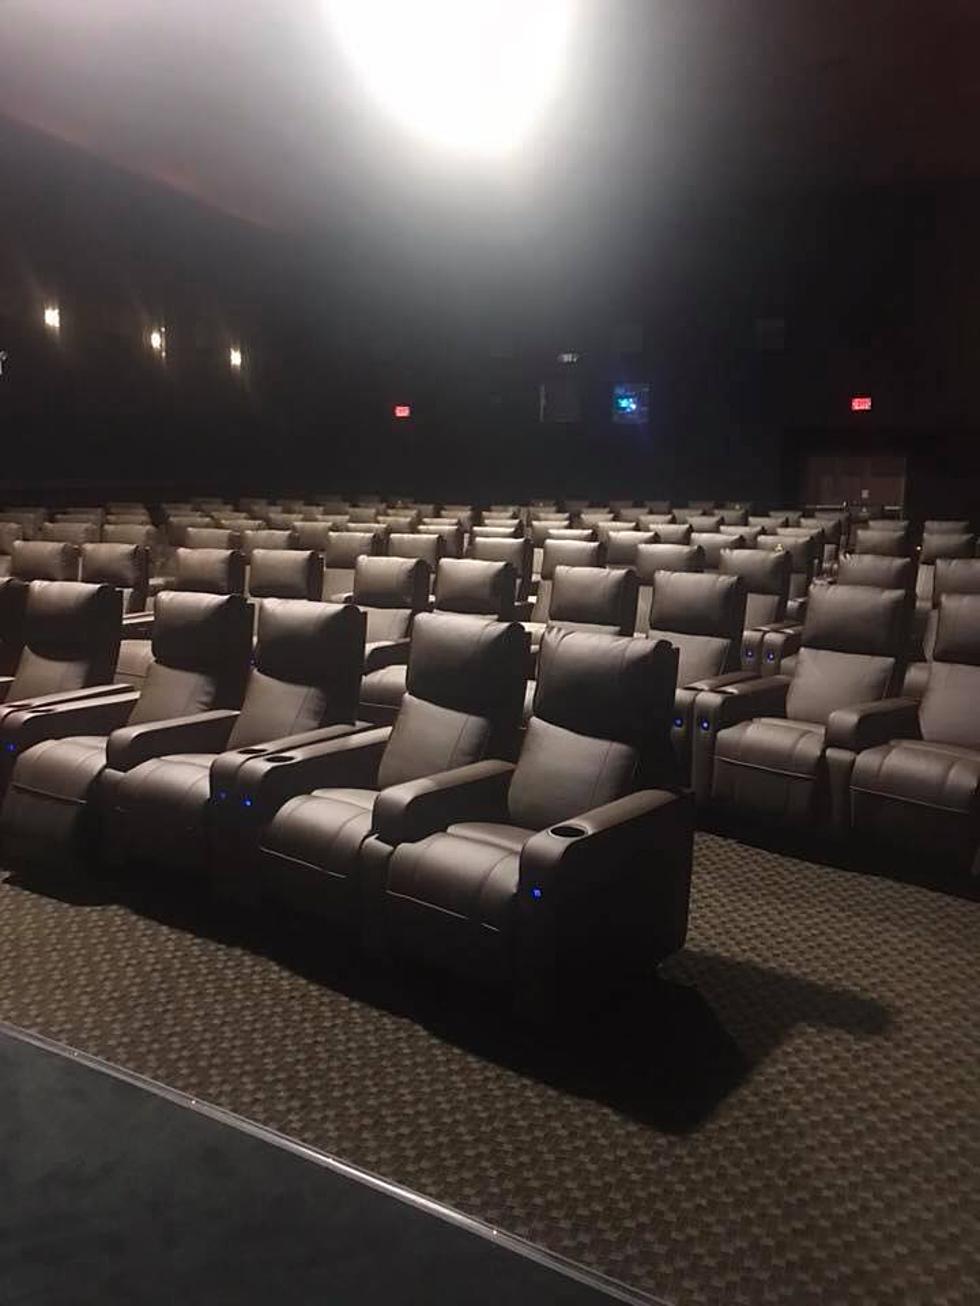 Check Out Photos of the Upgraded Wichita Falls Mall Theater